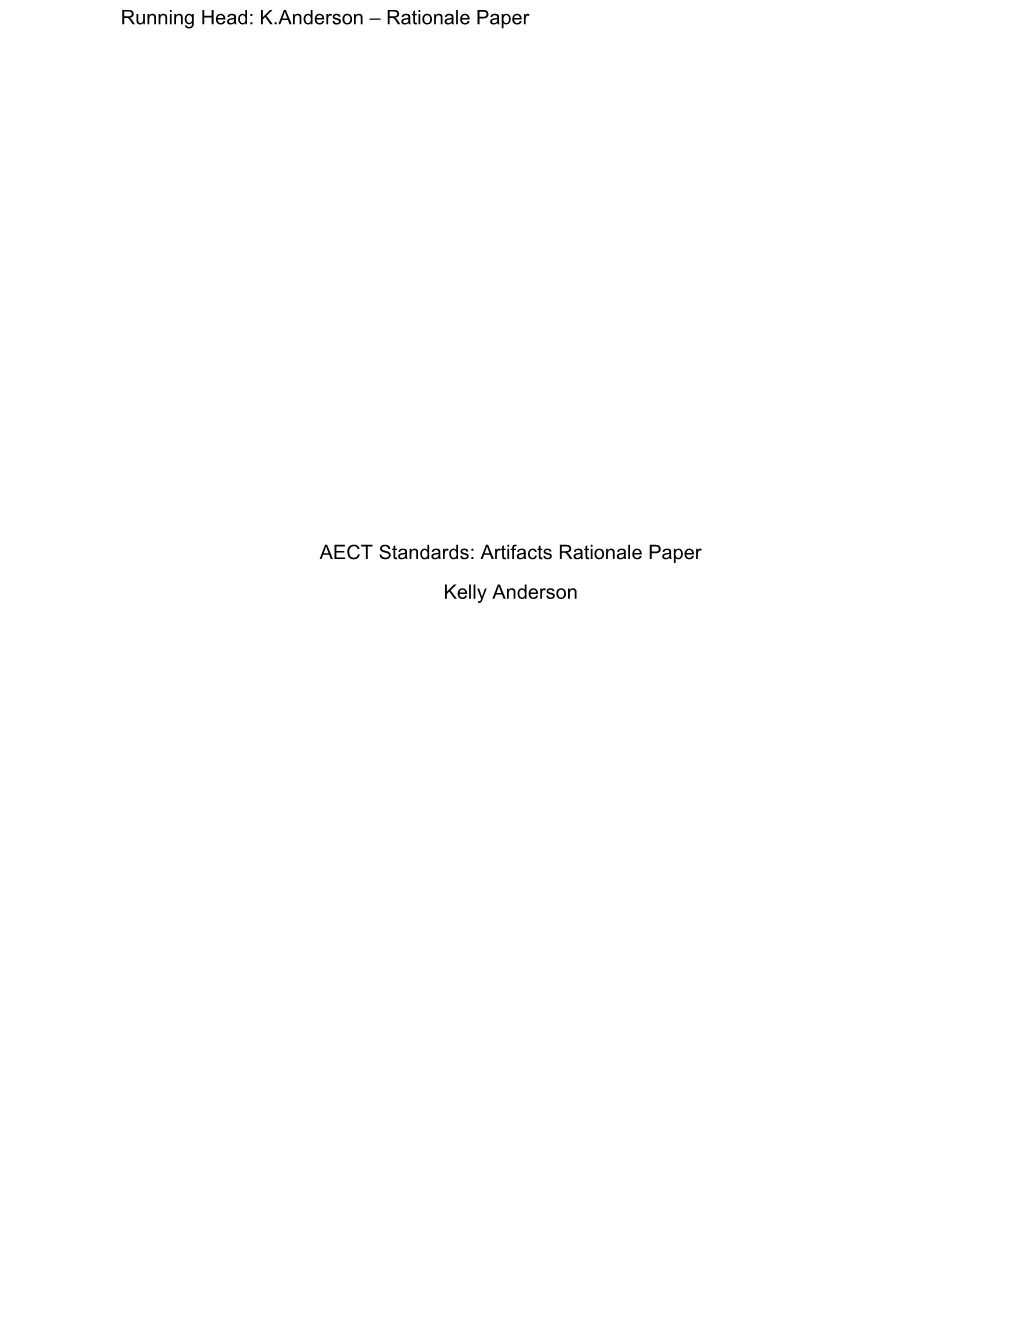 AECT Standards: Artifacts Rationale Paper